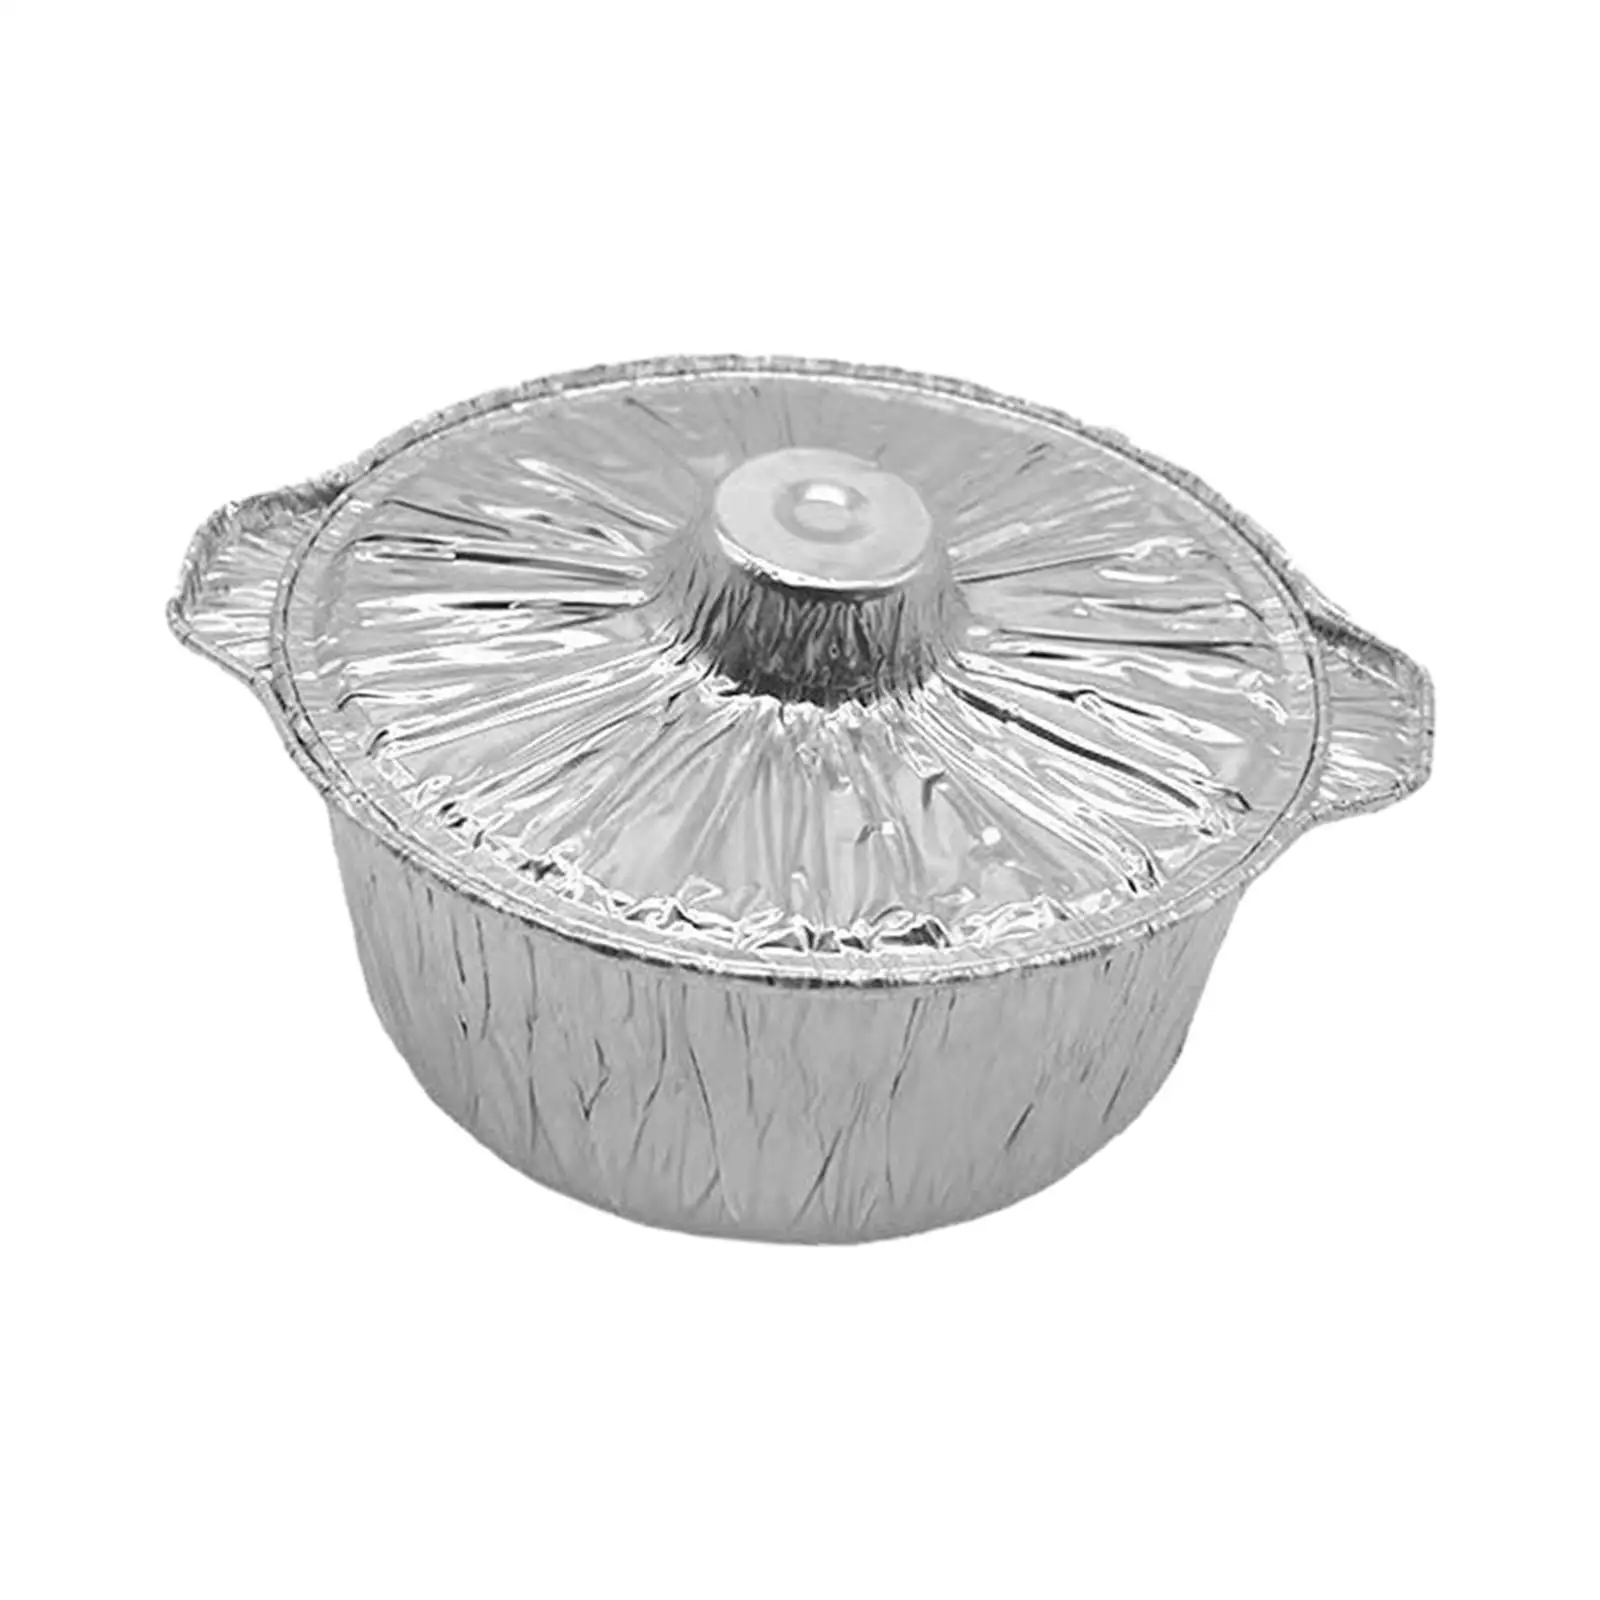 Baking Tin Pot Meat Pot Hotpot Bakeware Cake Pan Tin Foil Pot Cooking Pot for Barbecue, Kitchen, Take Out, Events, Broiling